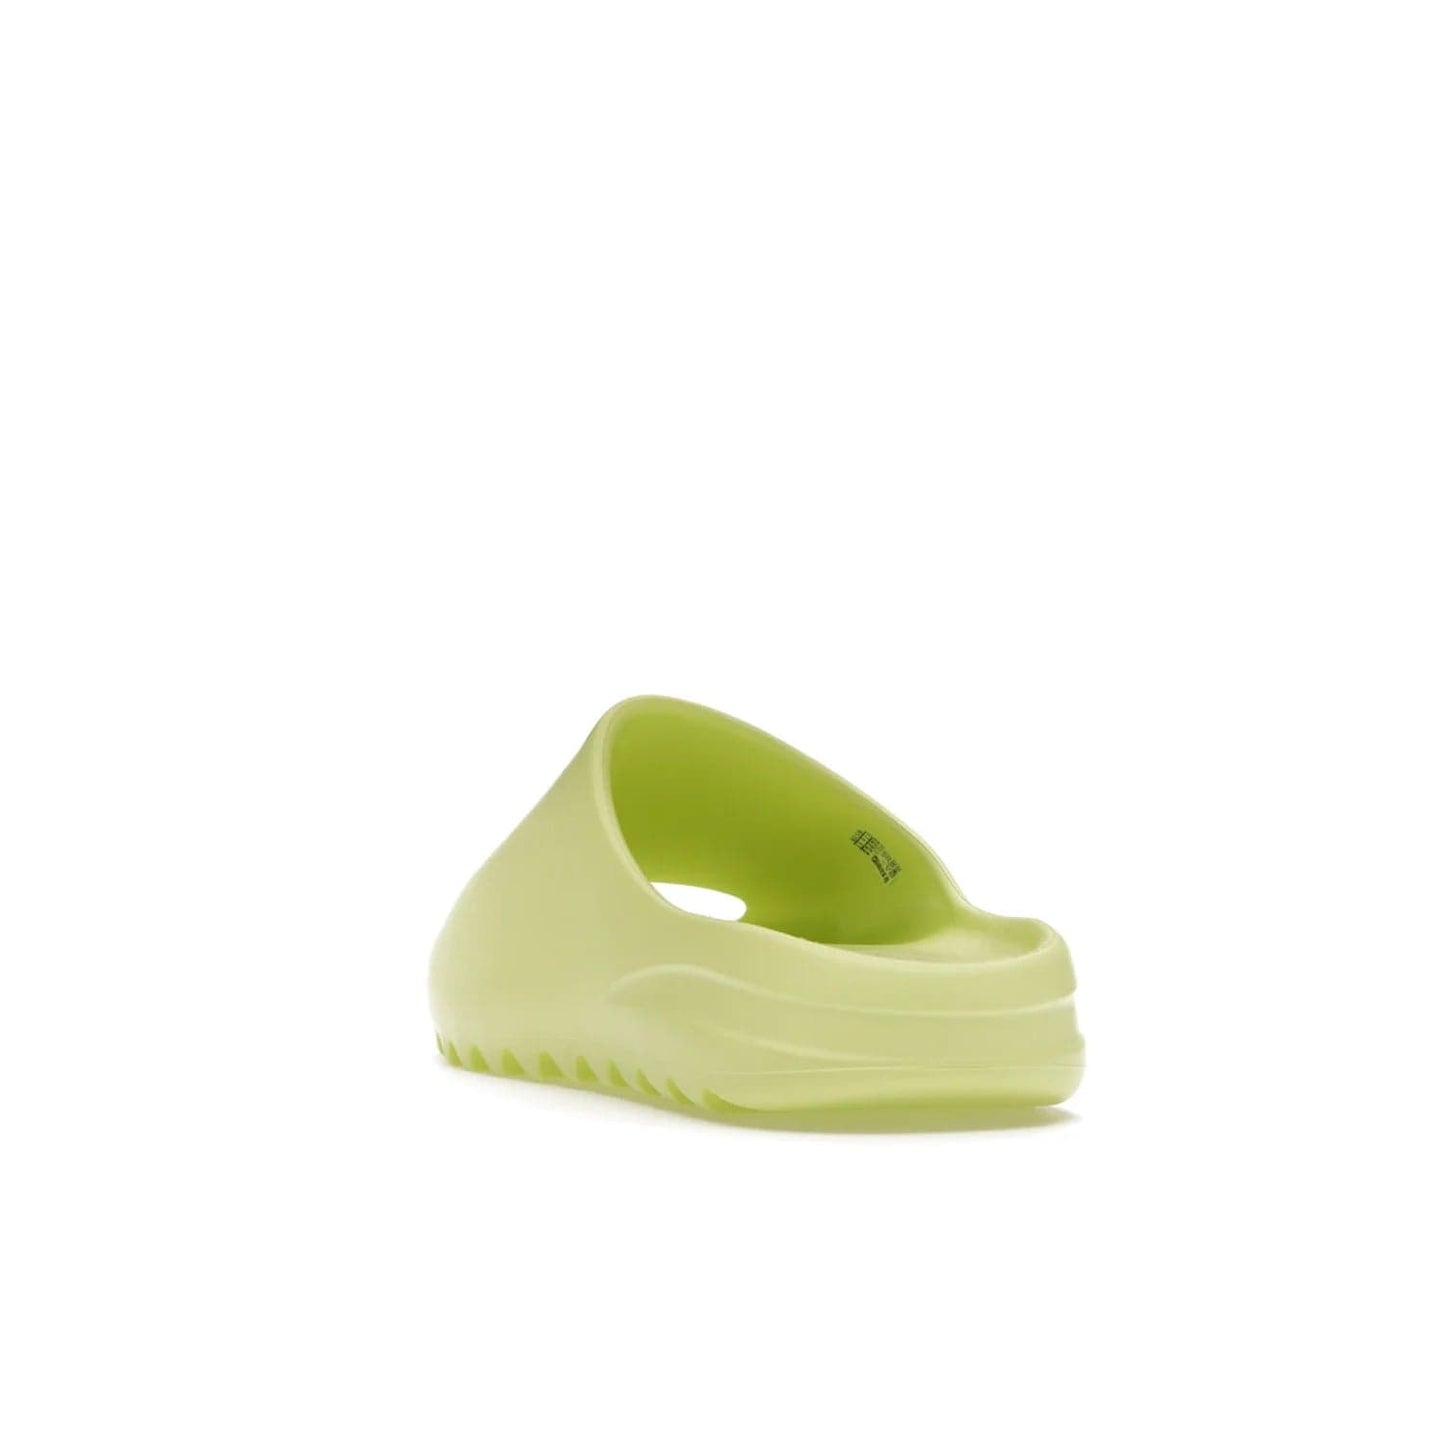 adidas Yeezy Slide Glow Green - Image 26 - Only at www.BallersClubKickz.com - Experience an unexpected summer style with the adidas Yeezy Slide Glow Green. This limited edition slide sandal provides a lightweight and durable construction and a bold Glow Green hue. Strategic grooves enhance traction and provide all-day comfort. Make a statement with the adidas Yeezy Slide Glow Green.